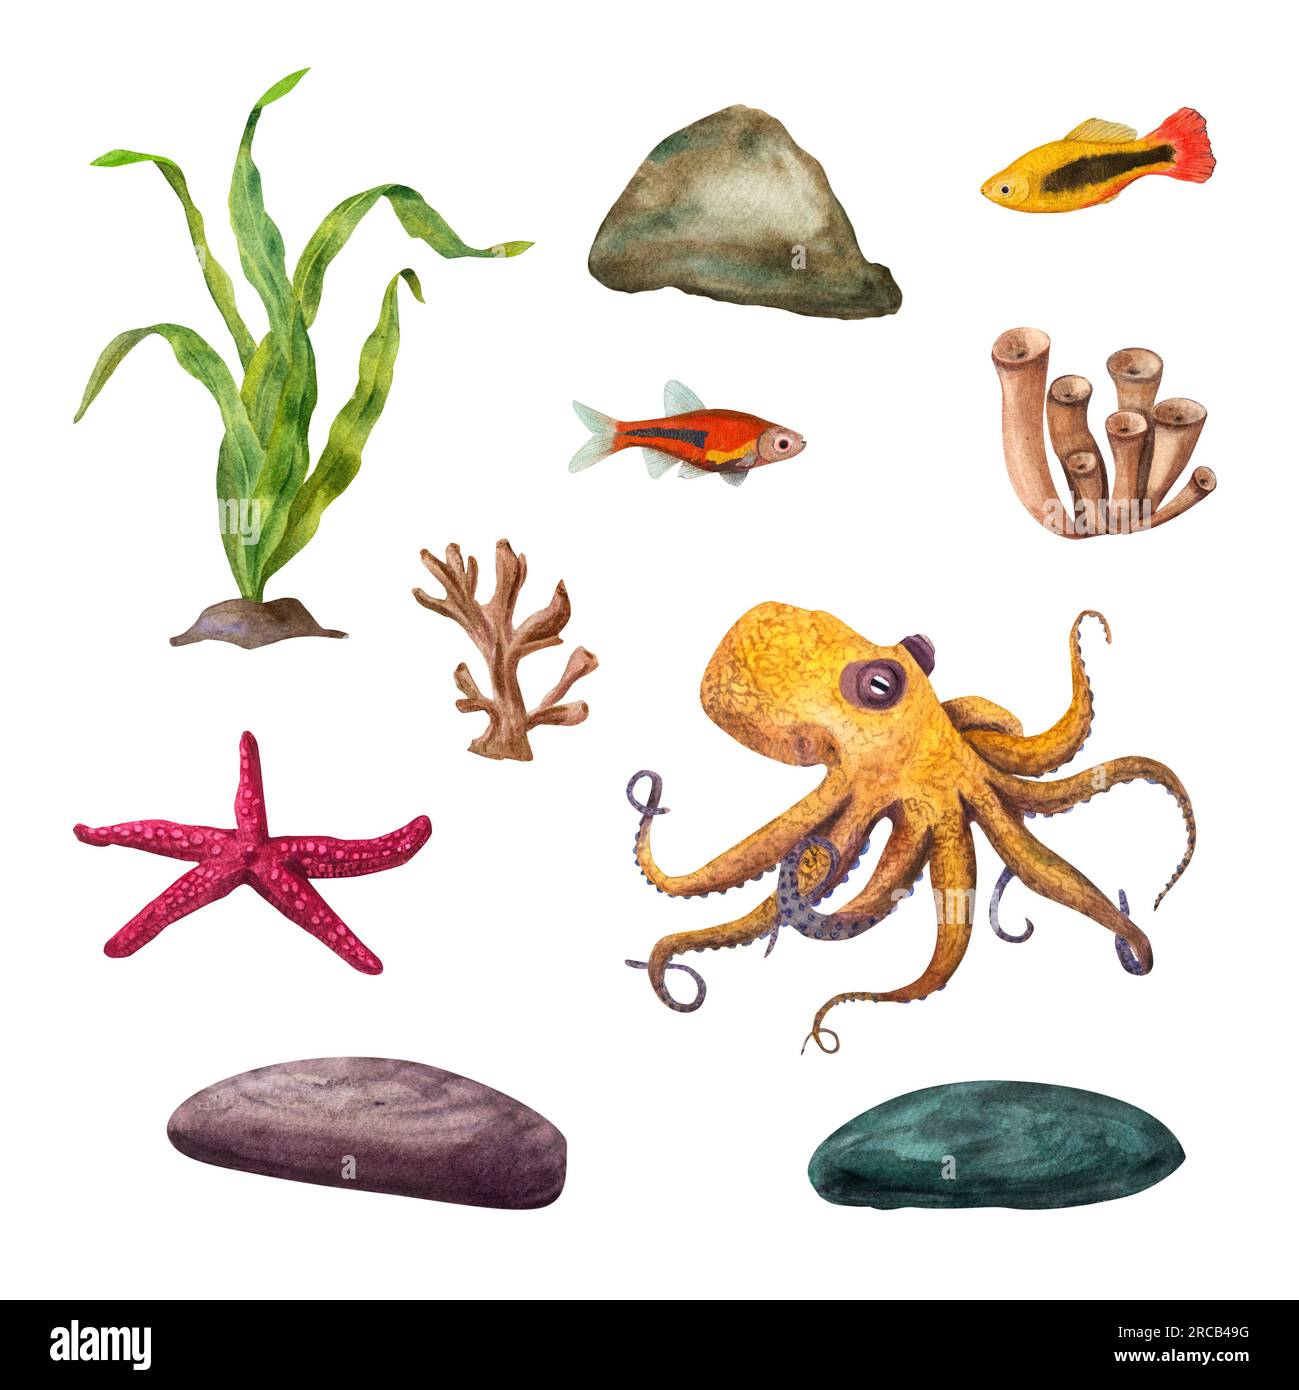 Set of sea dwellers. Marine green algae, octopus, sea star, corals, fish, underwater rocks. Composition isolated on white background. Watercolor Stock Photo